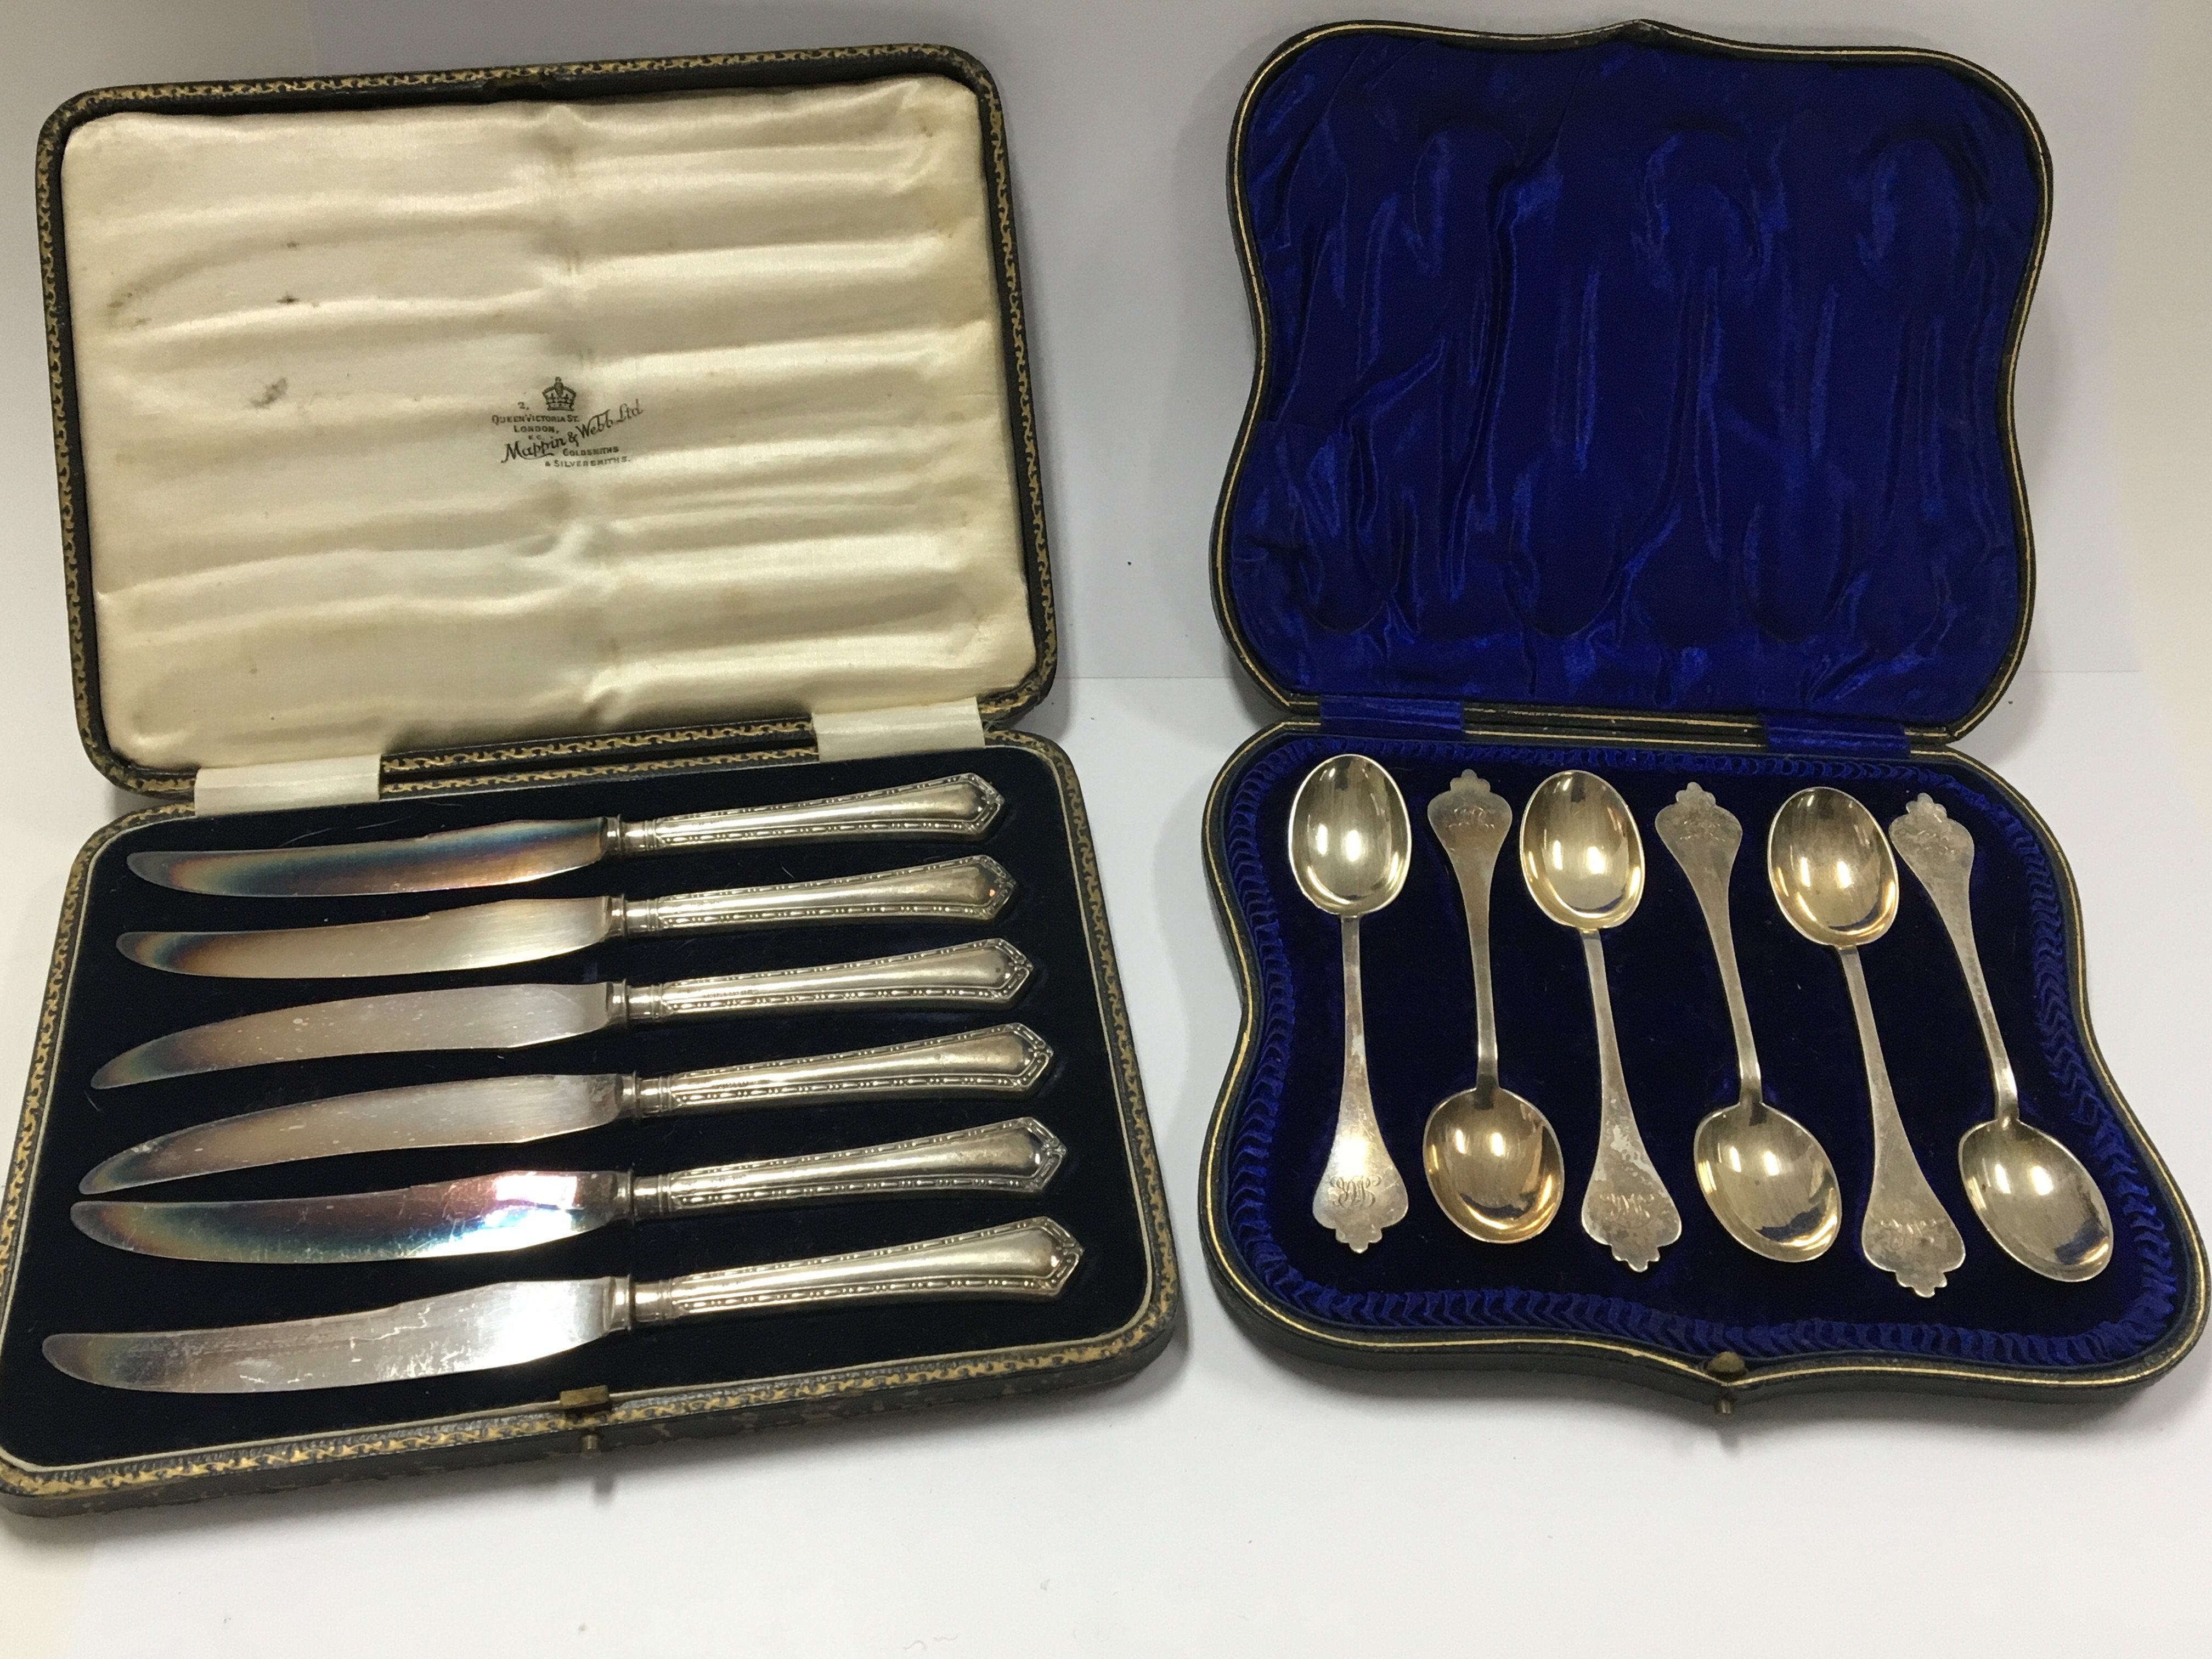 A cased set of silver spoons, London hallmarks and